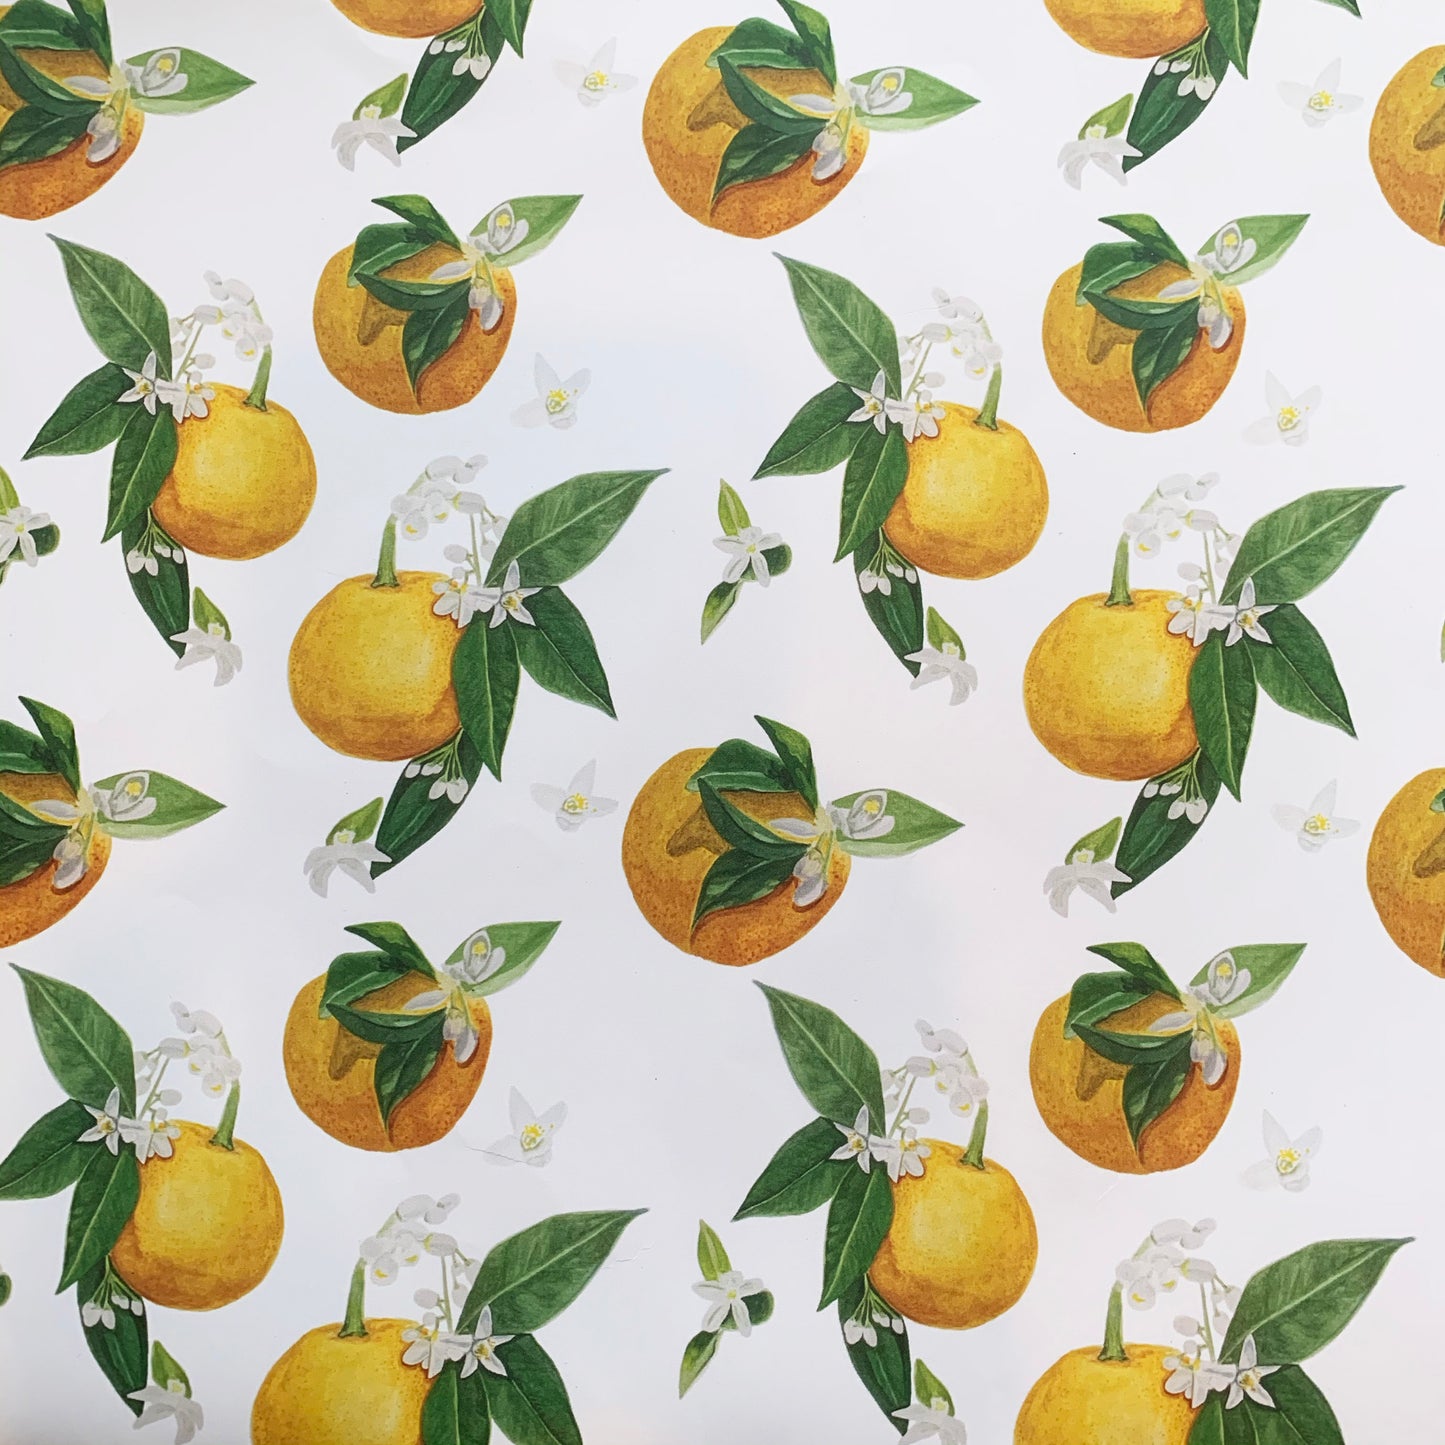 A close up of the Orange Blossom pattern! Vibrant yellows and oranges with green leaves and white orange blossom flowers